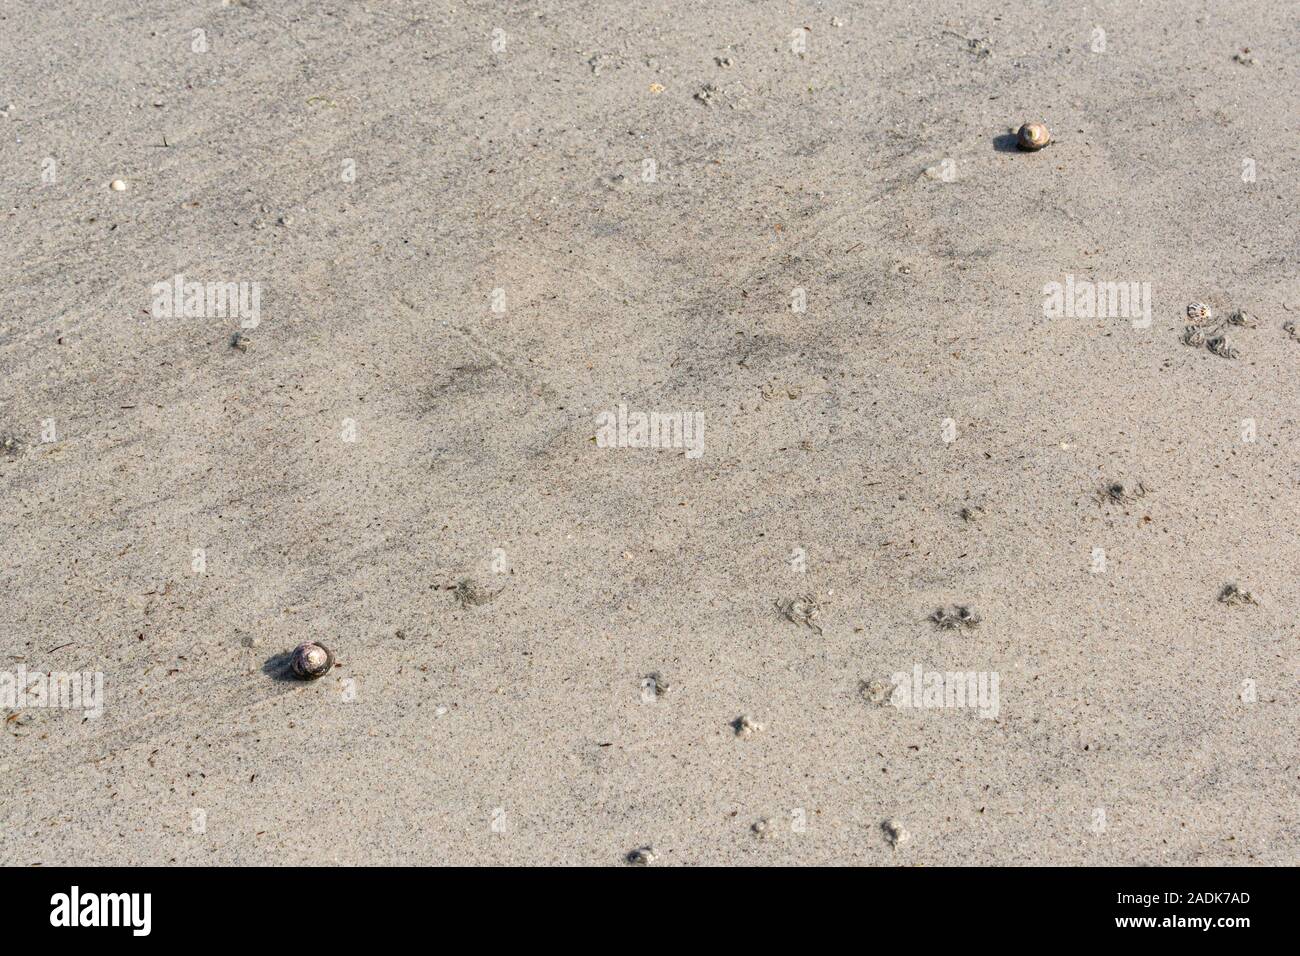 Two top shell snails on a wet sandy beach Stock Photo